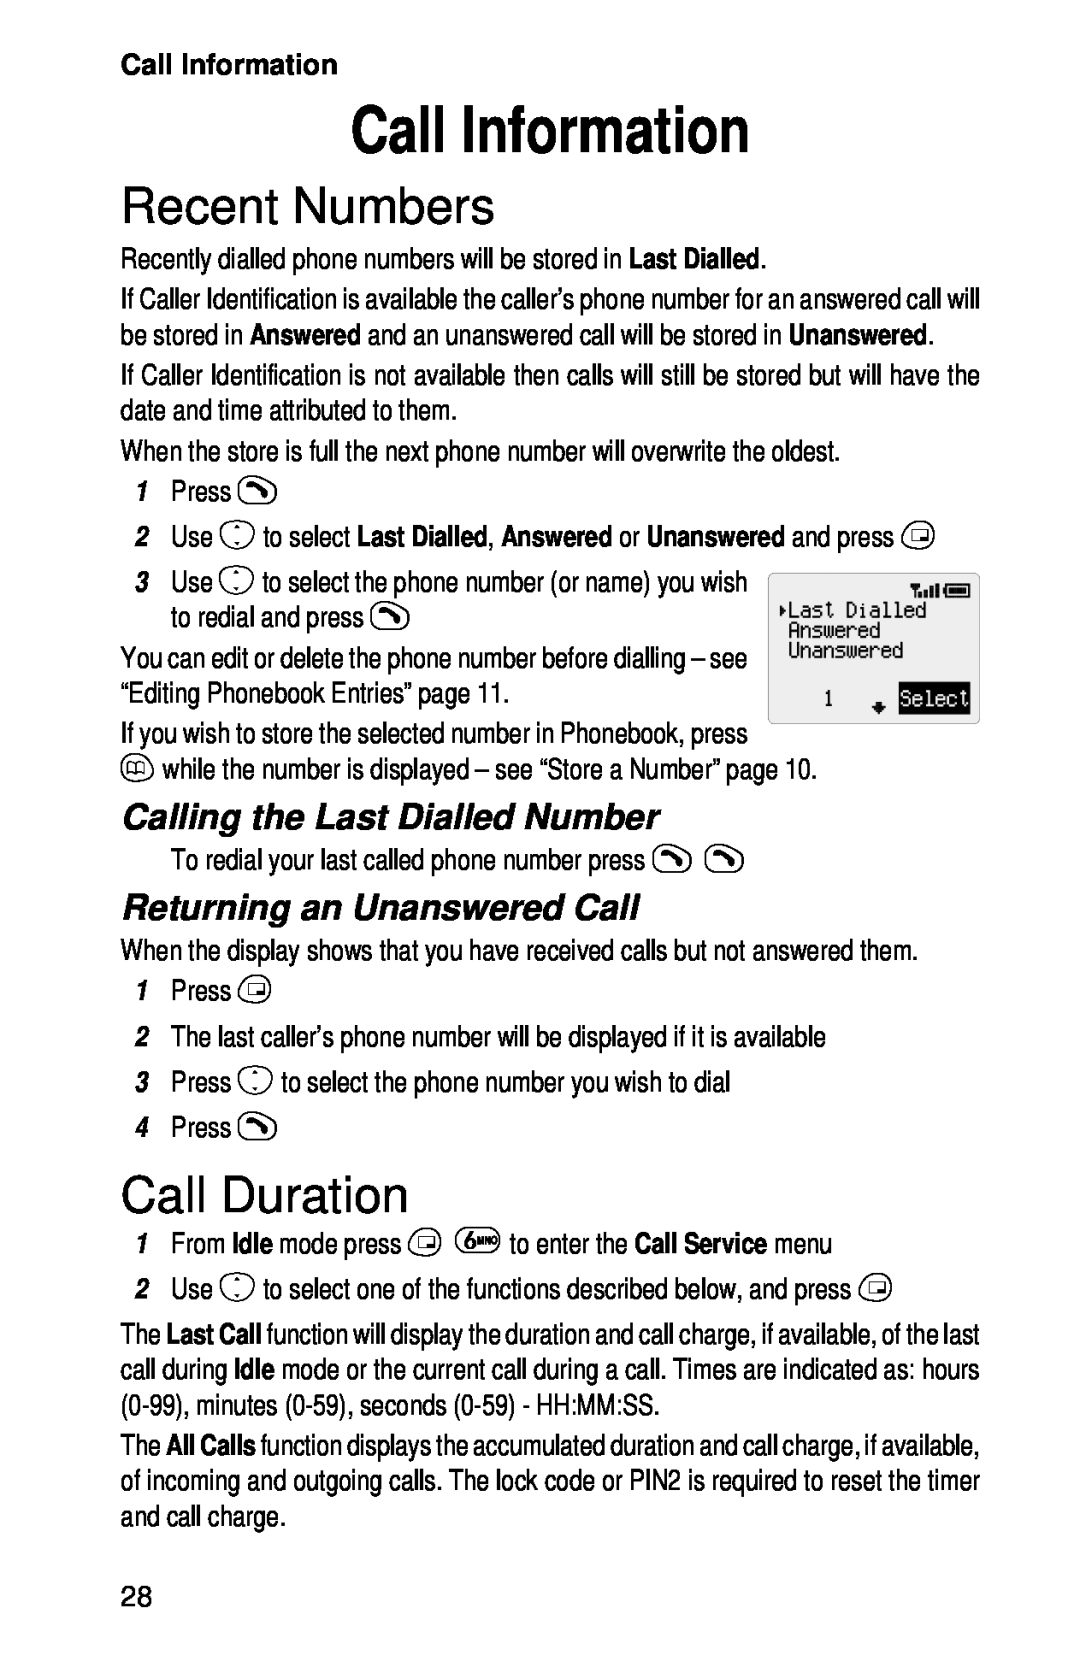 Panasonic EB-GD52 operating instructions Call Information, Recent Numbers, Call Duration, Calling the Last Dialled Number 